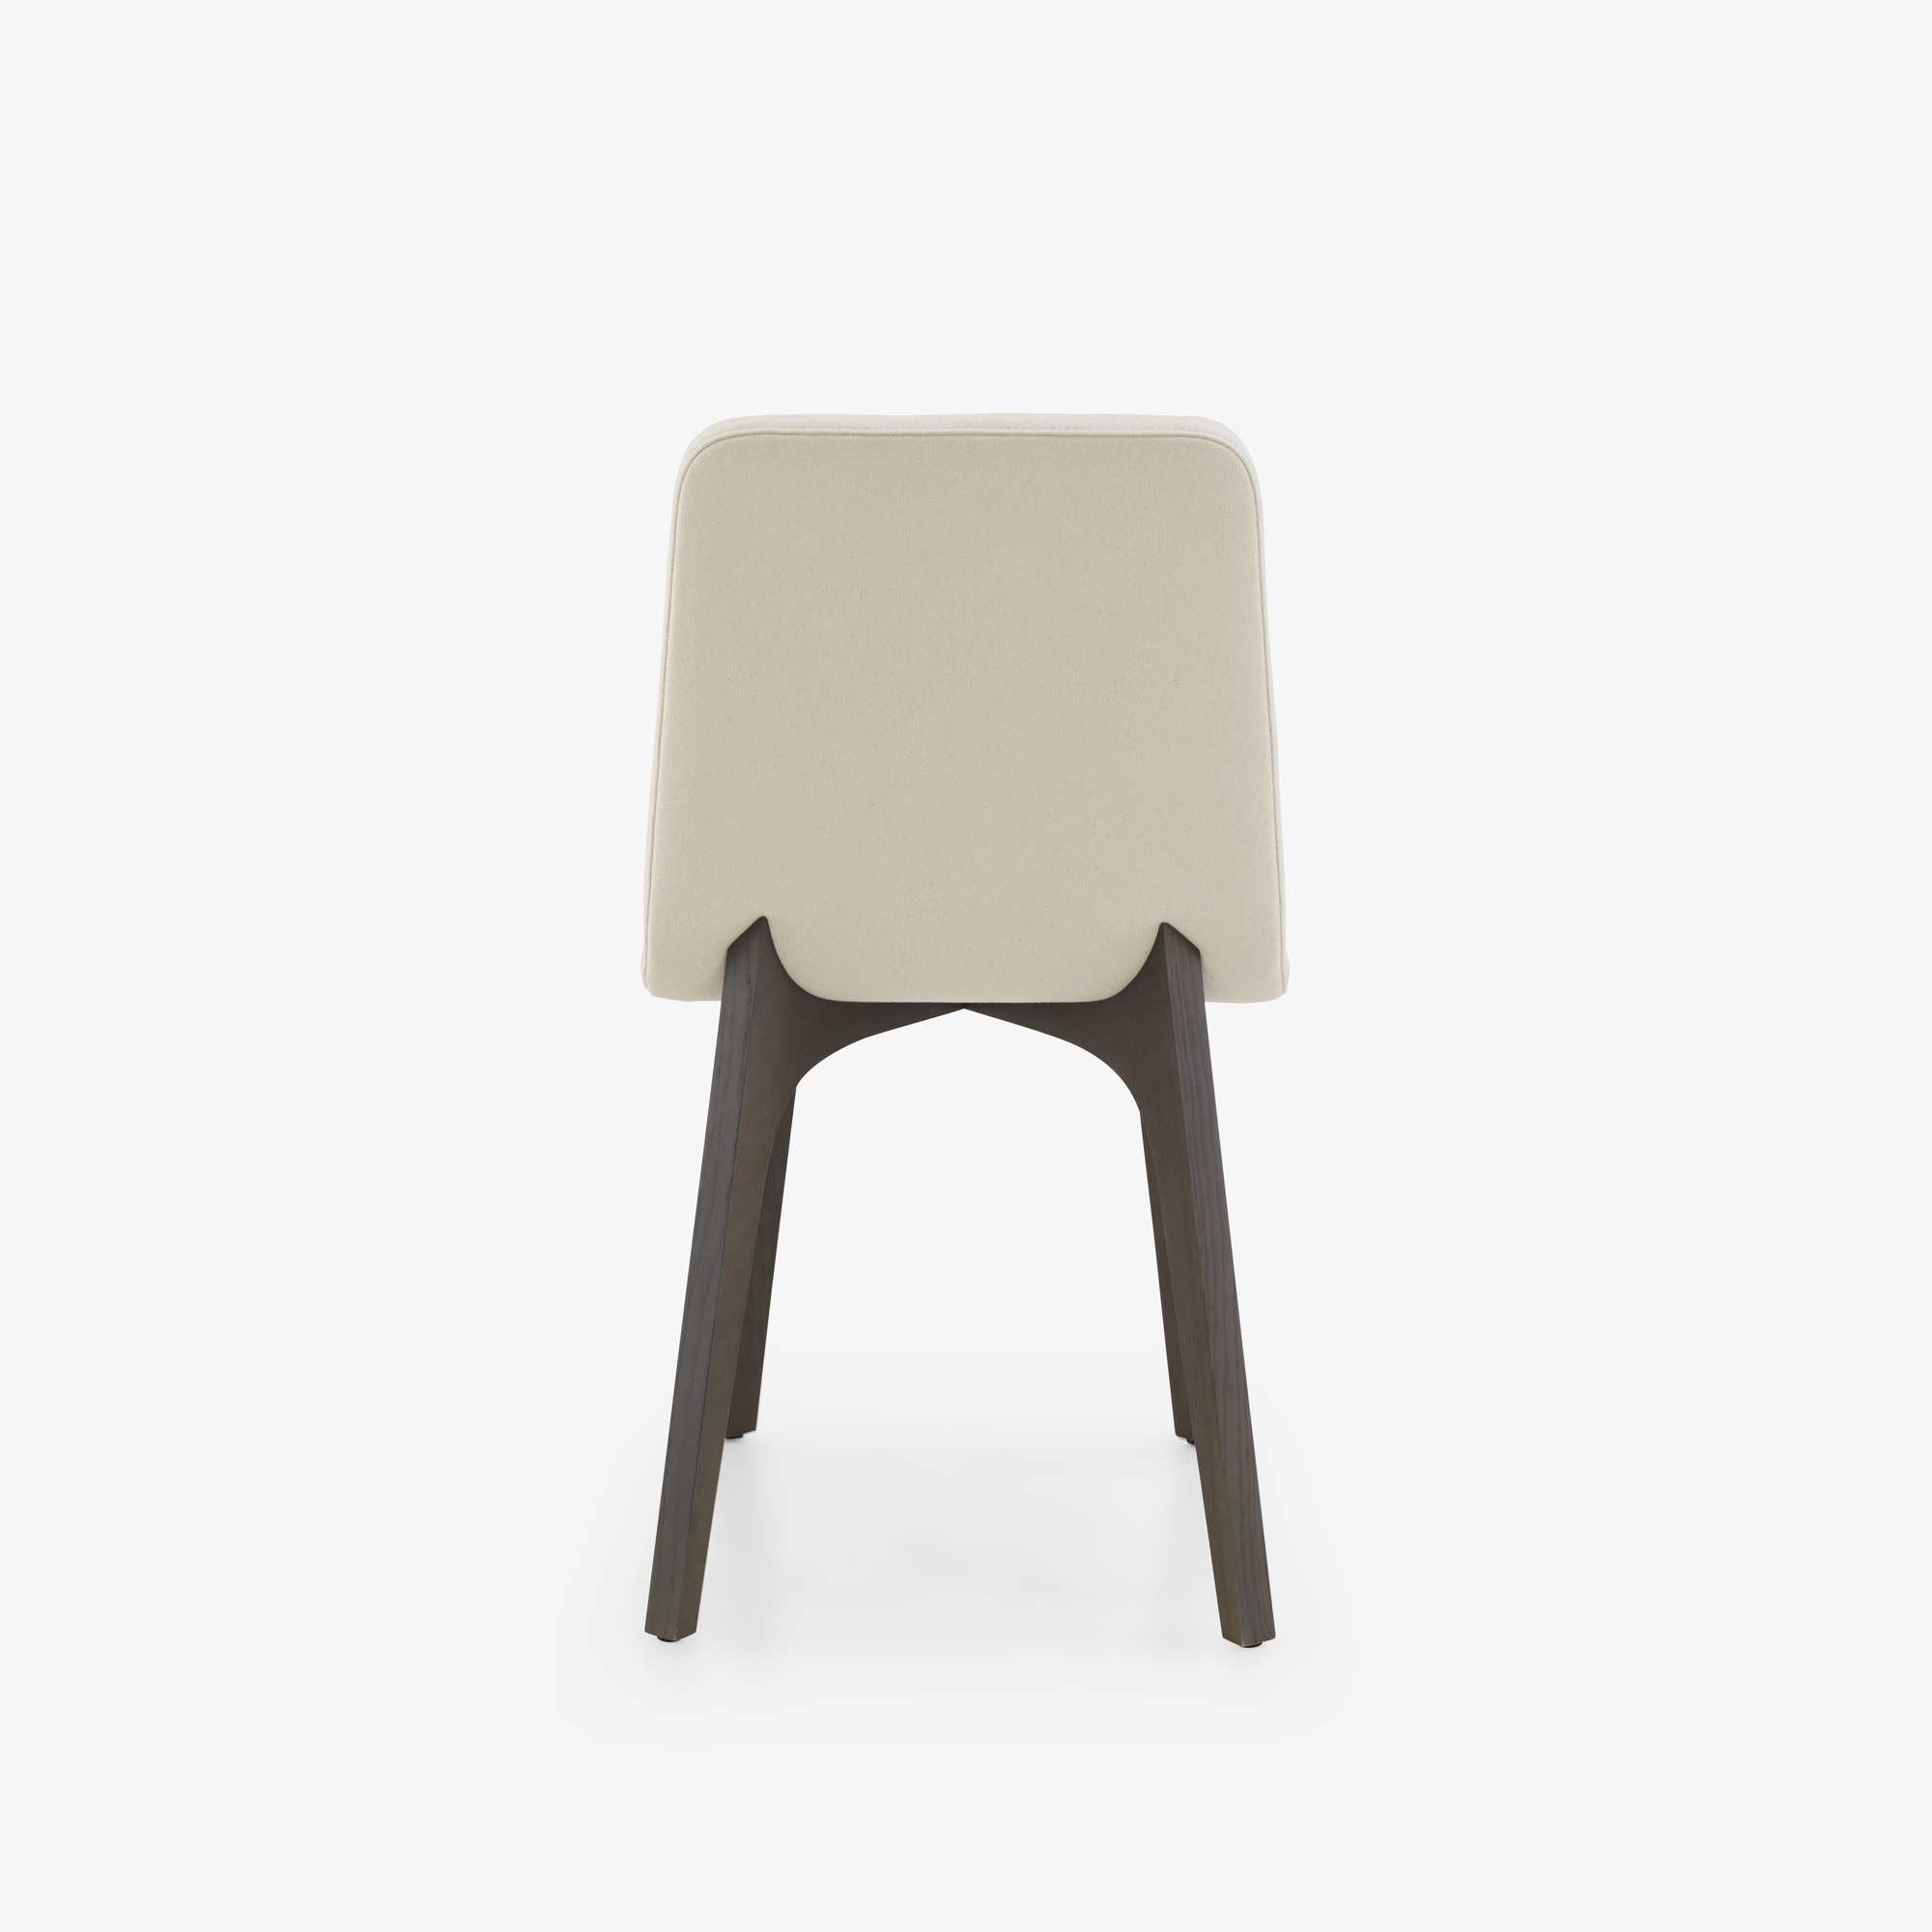 Image Chair wooden base 10